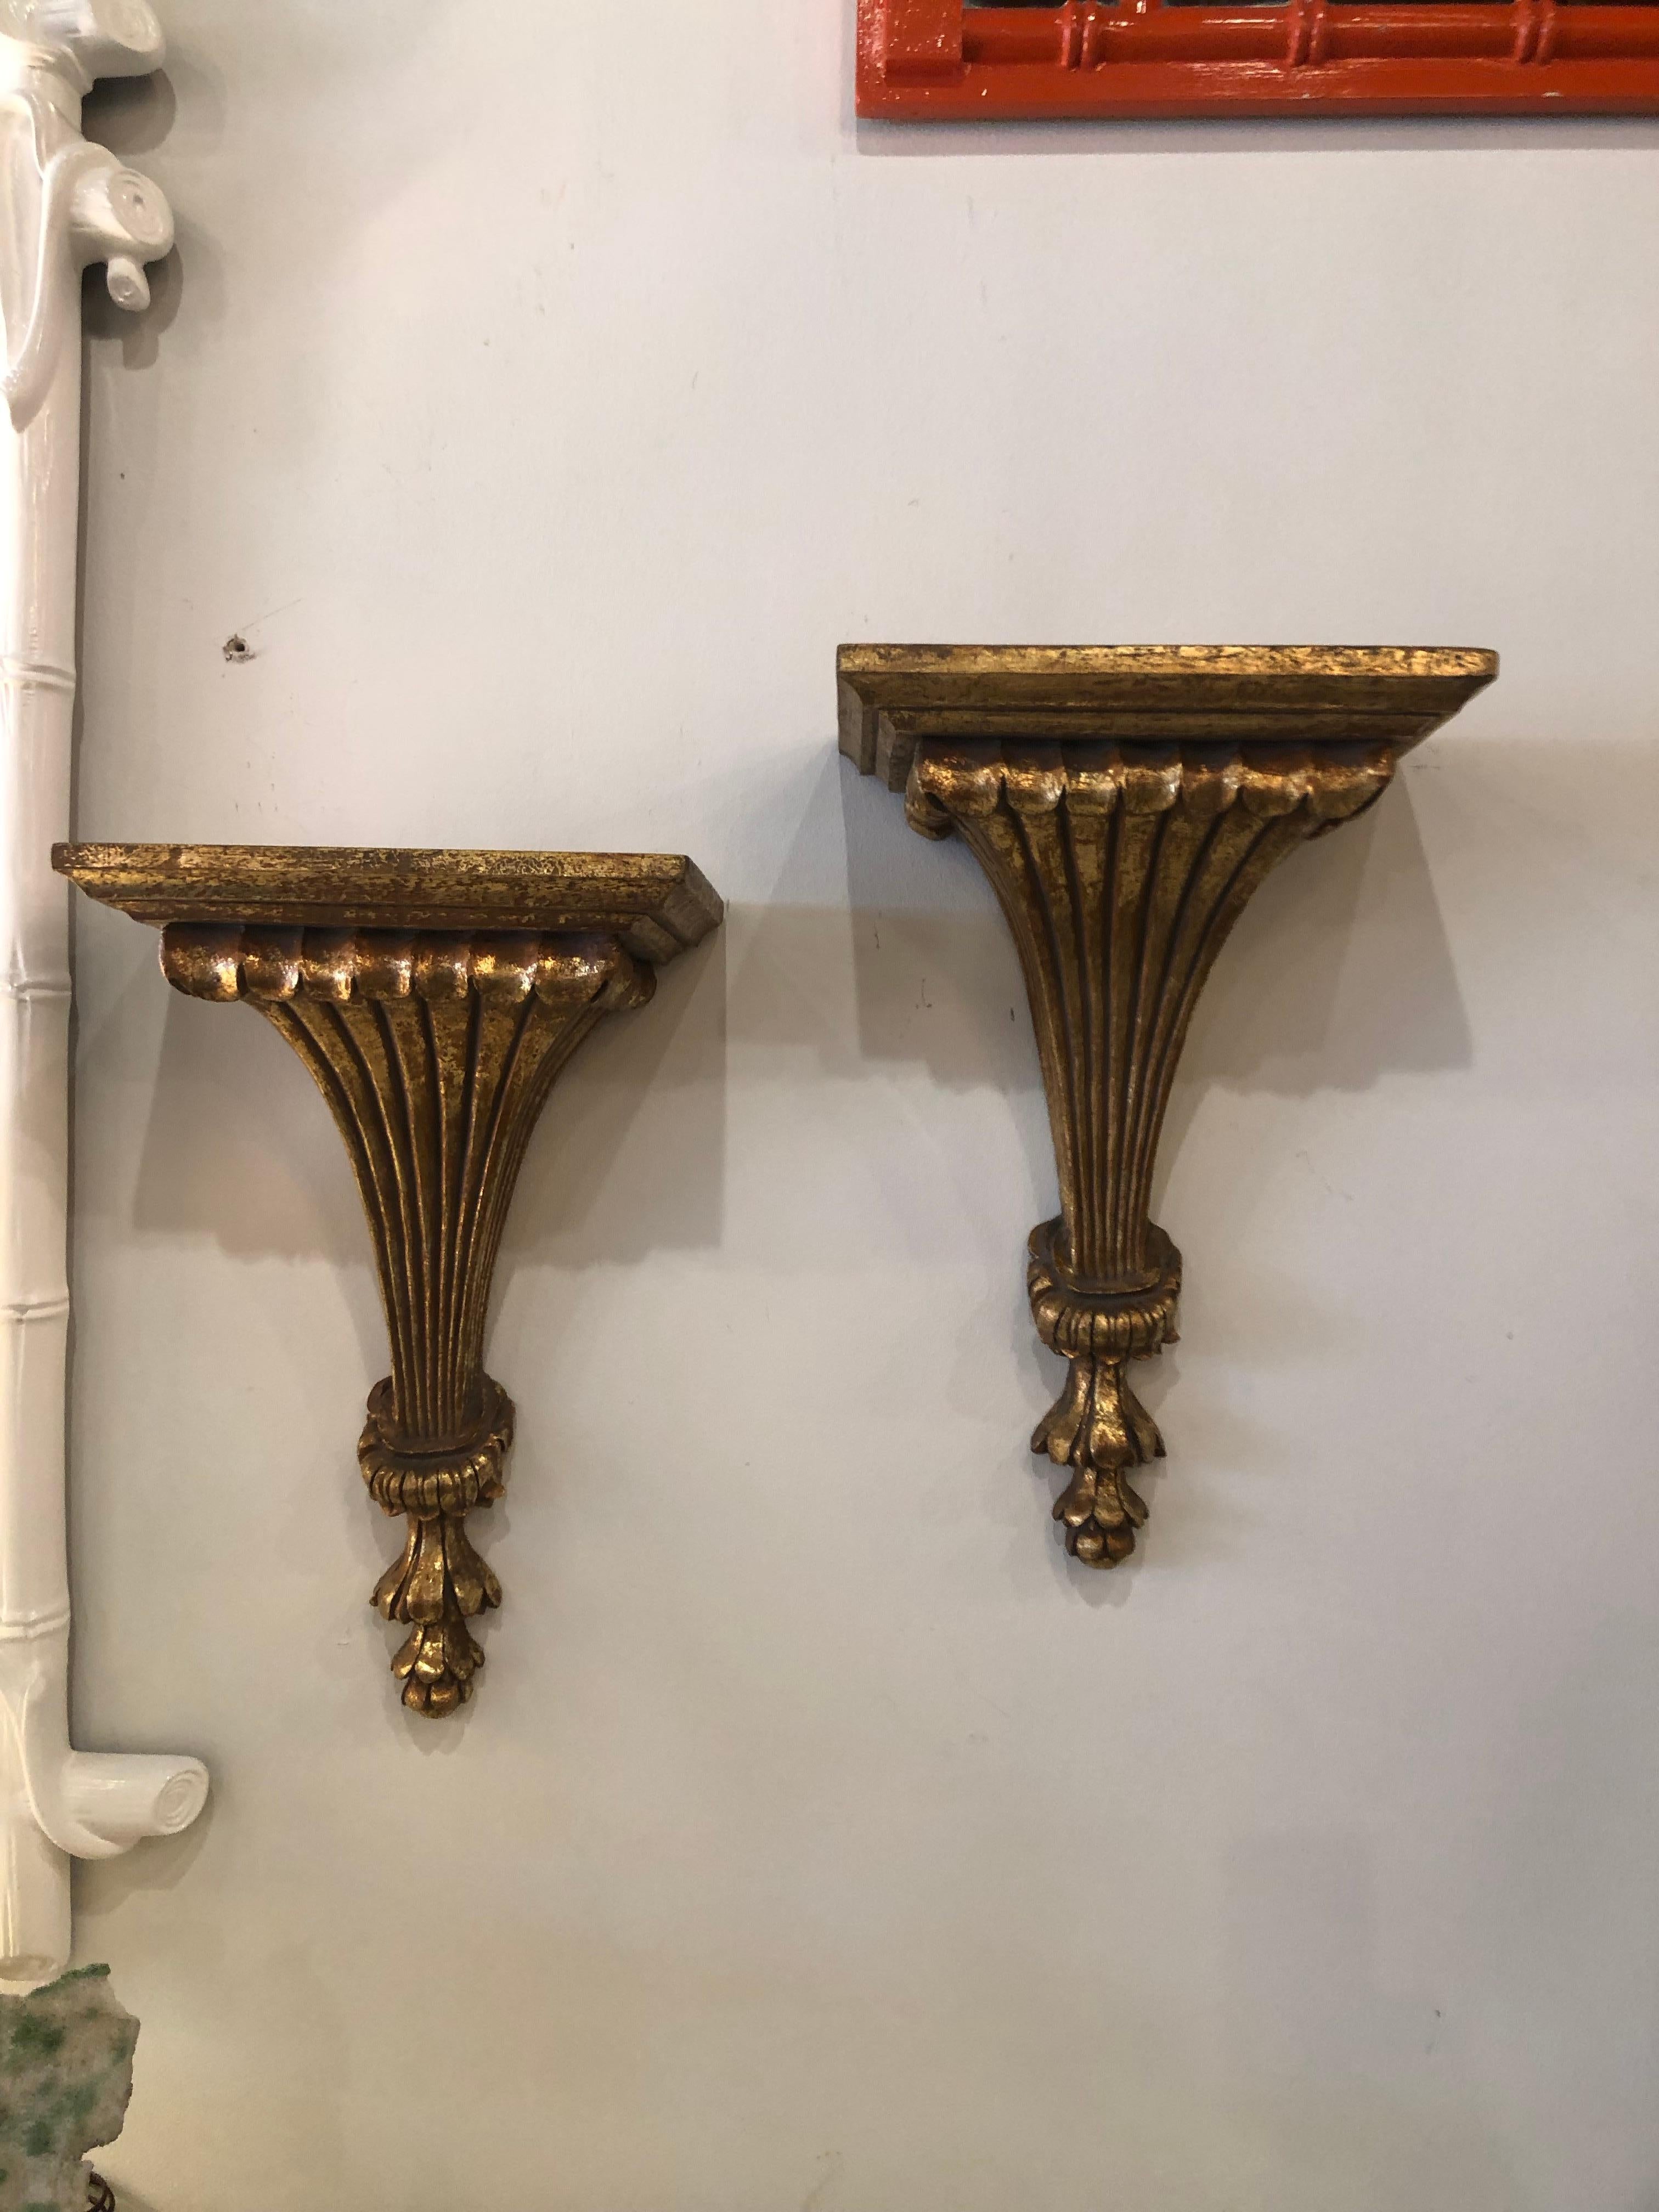 Lovely pair of vintage gold gilt wall shelf sconces. Ready to hang on your wall.